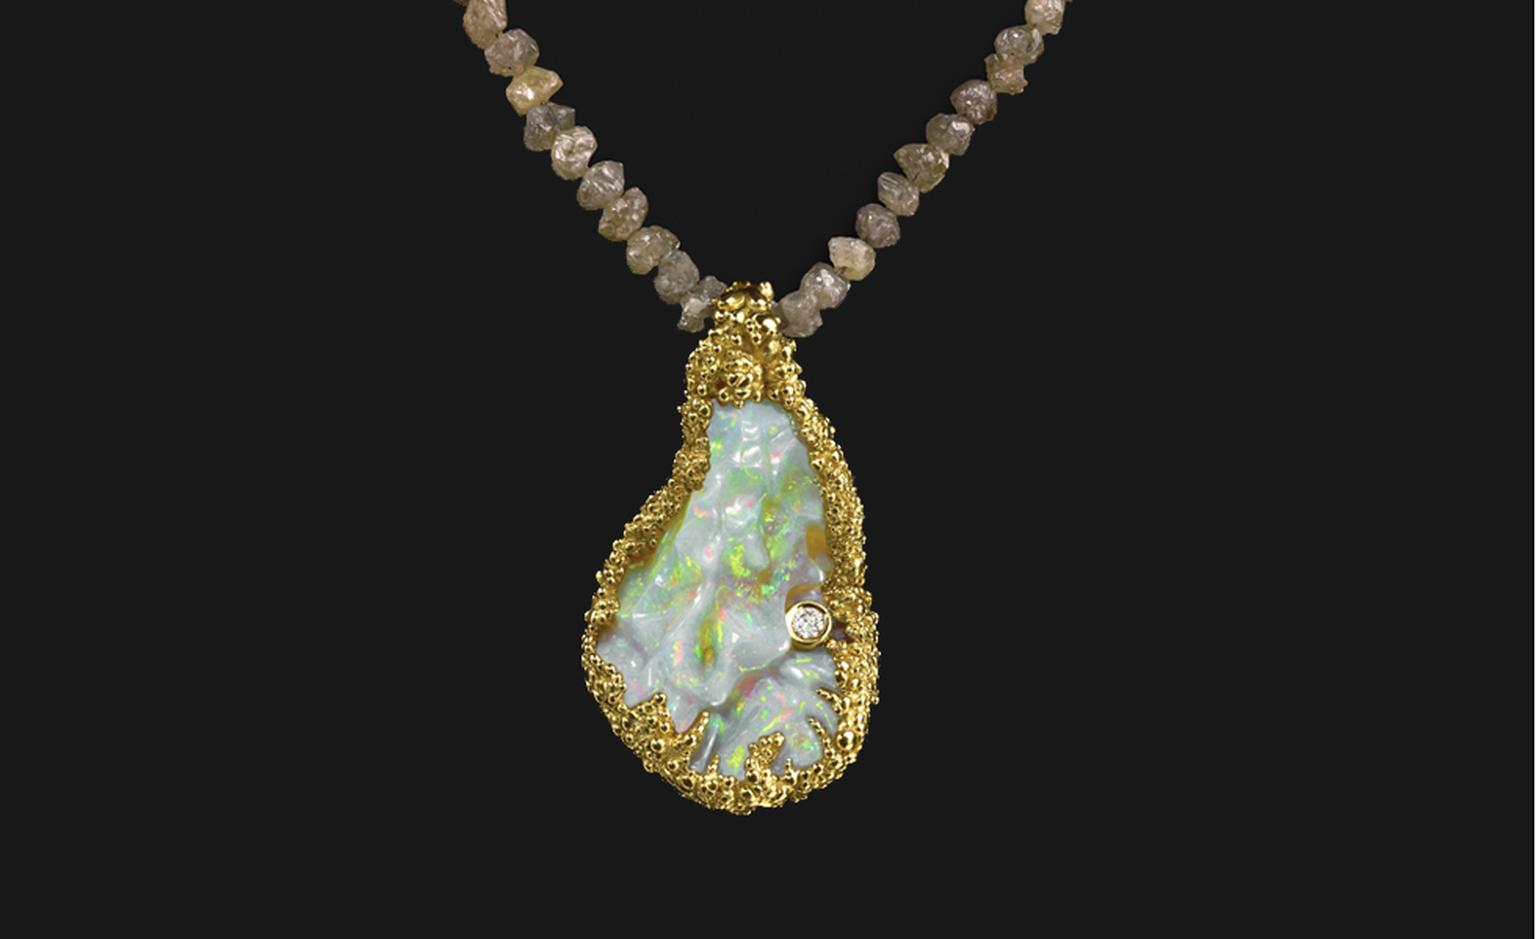 Ornella Iannuzzi: The Blue Nile Falls pendant. Made with a 20 cts hand-carved Wello opal set in 18k gold with a brilliant cut diamond, and mounted on rough diamonds (42cts). Unique Piece. £12,500.